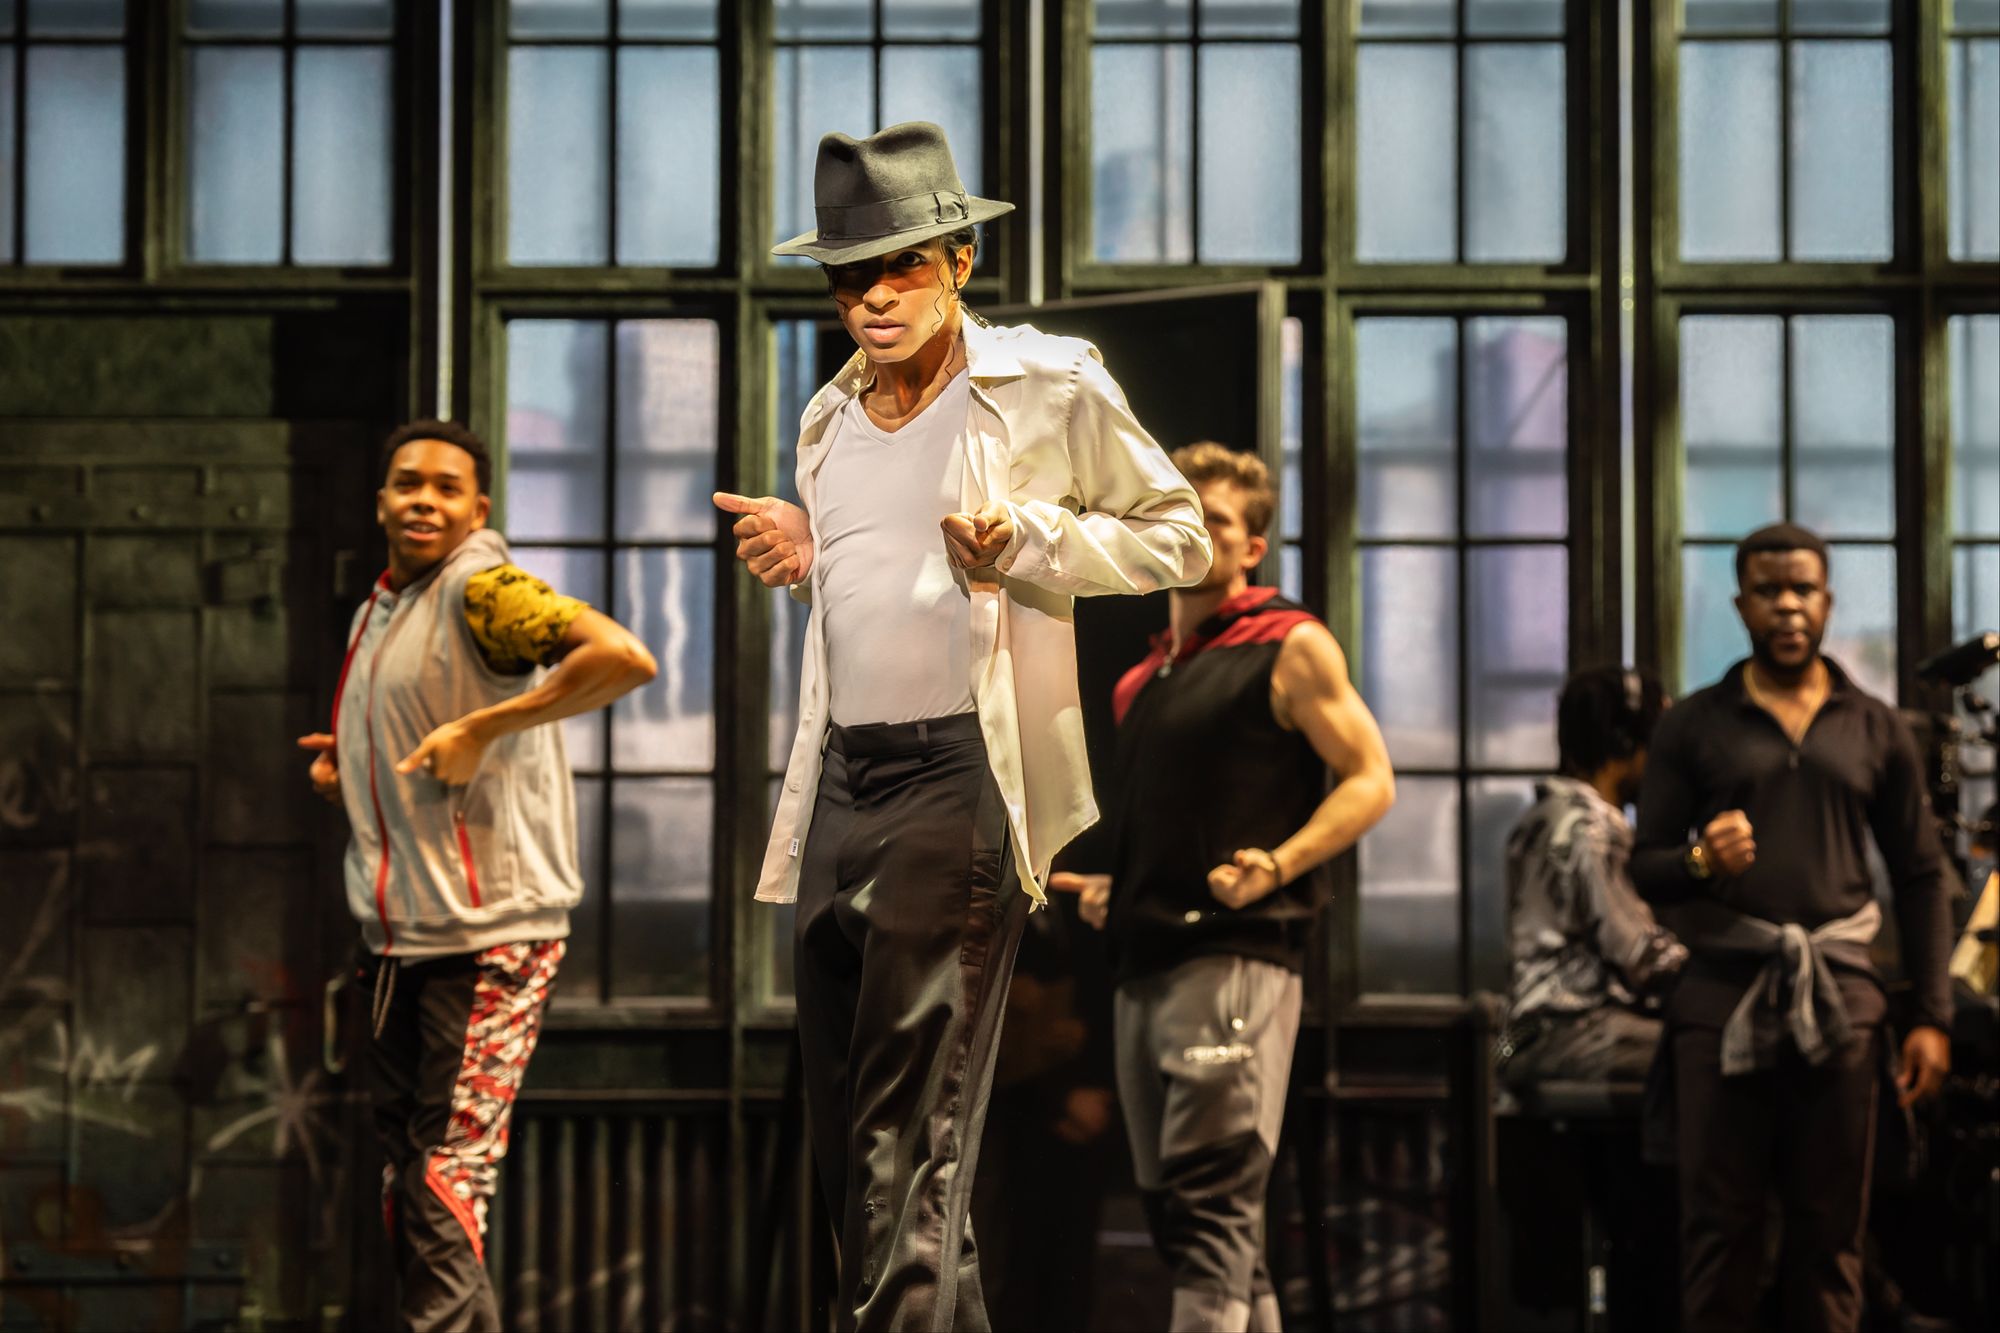 mj the musical at prince edward theatre review: a ravishing spectacle if you ignore the elephant in the room